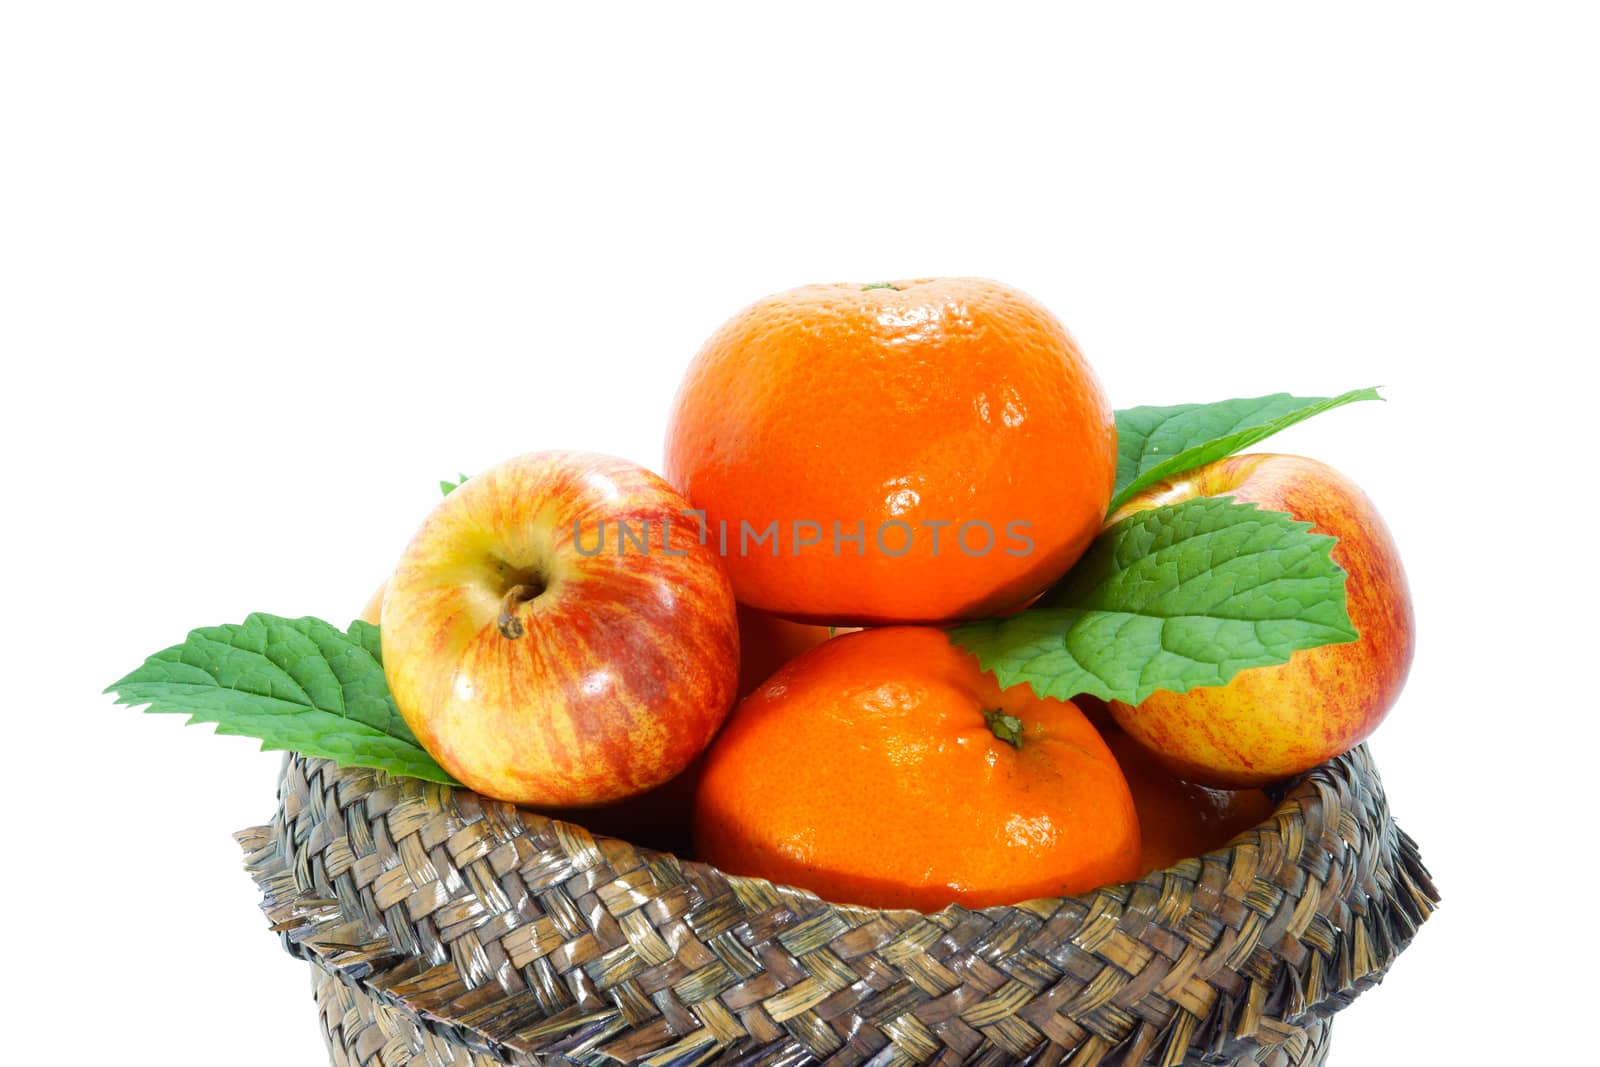 Orange, apple and persimmon in the basket of papyrus.